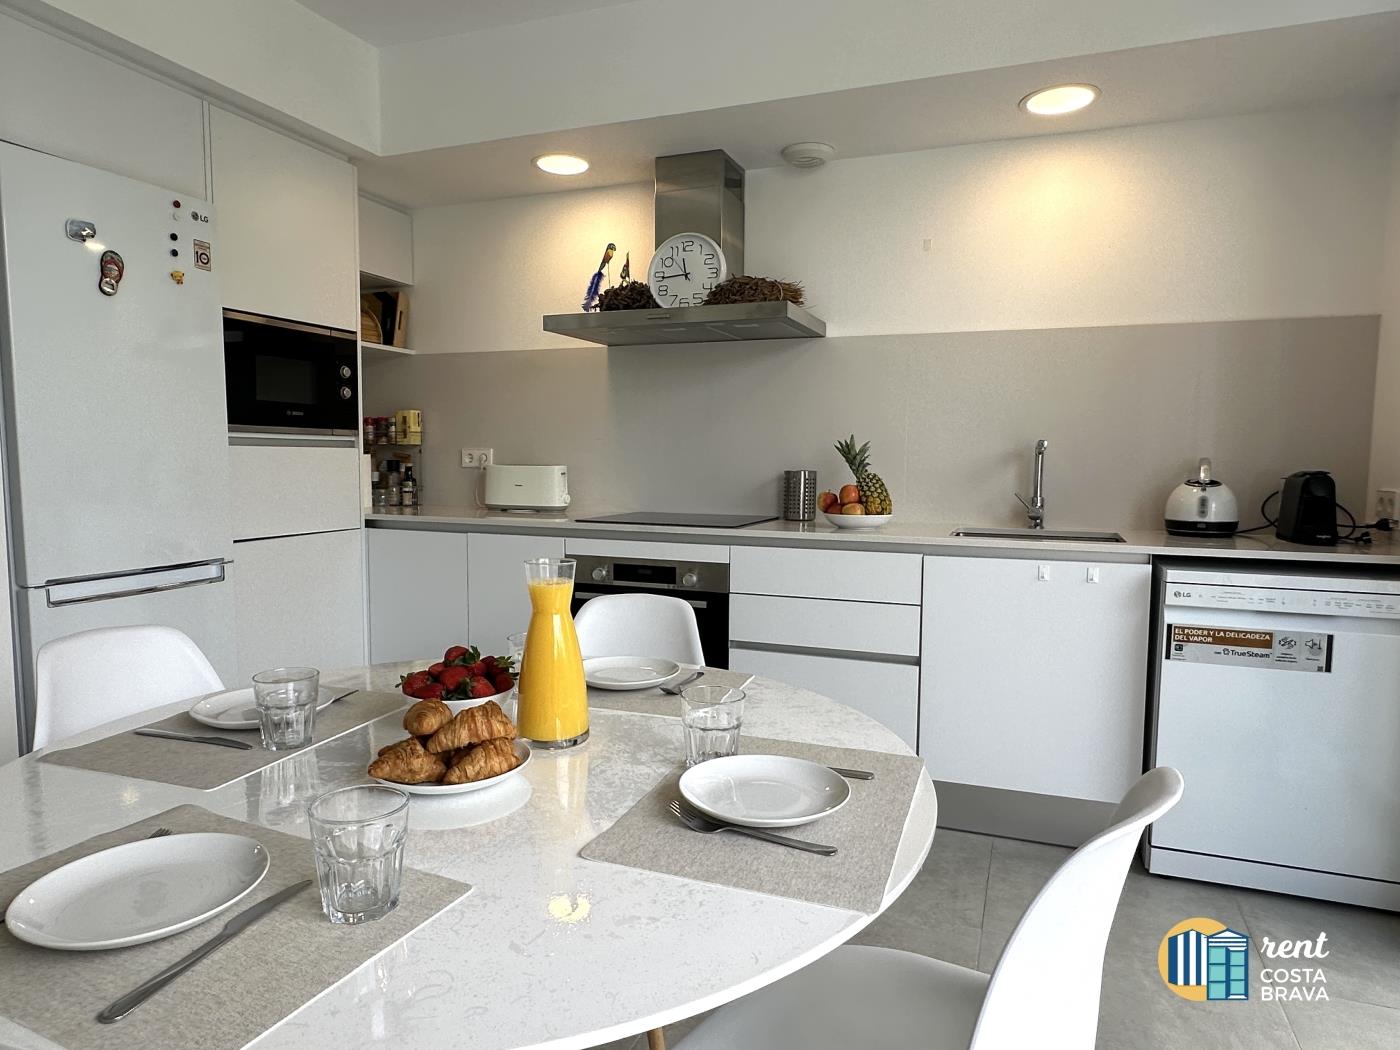 Newly built Jardins flat only 2 minutes walking distance to the city centre in Platja d'Aro